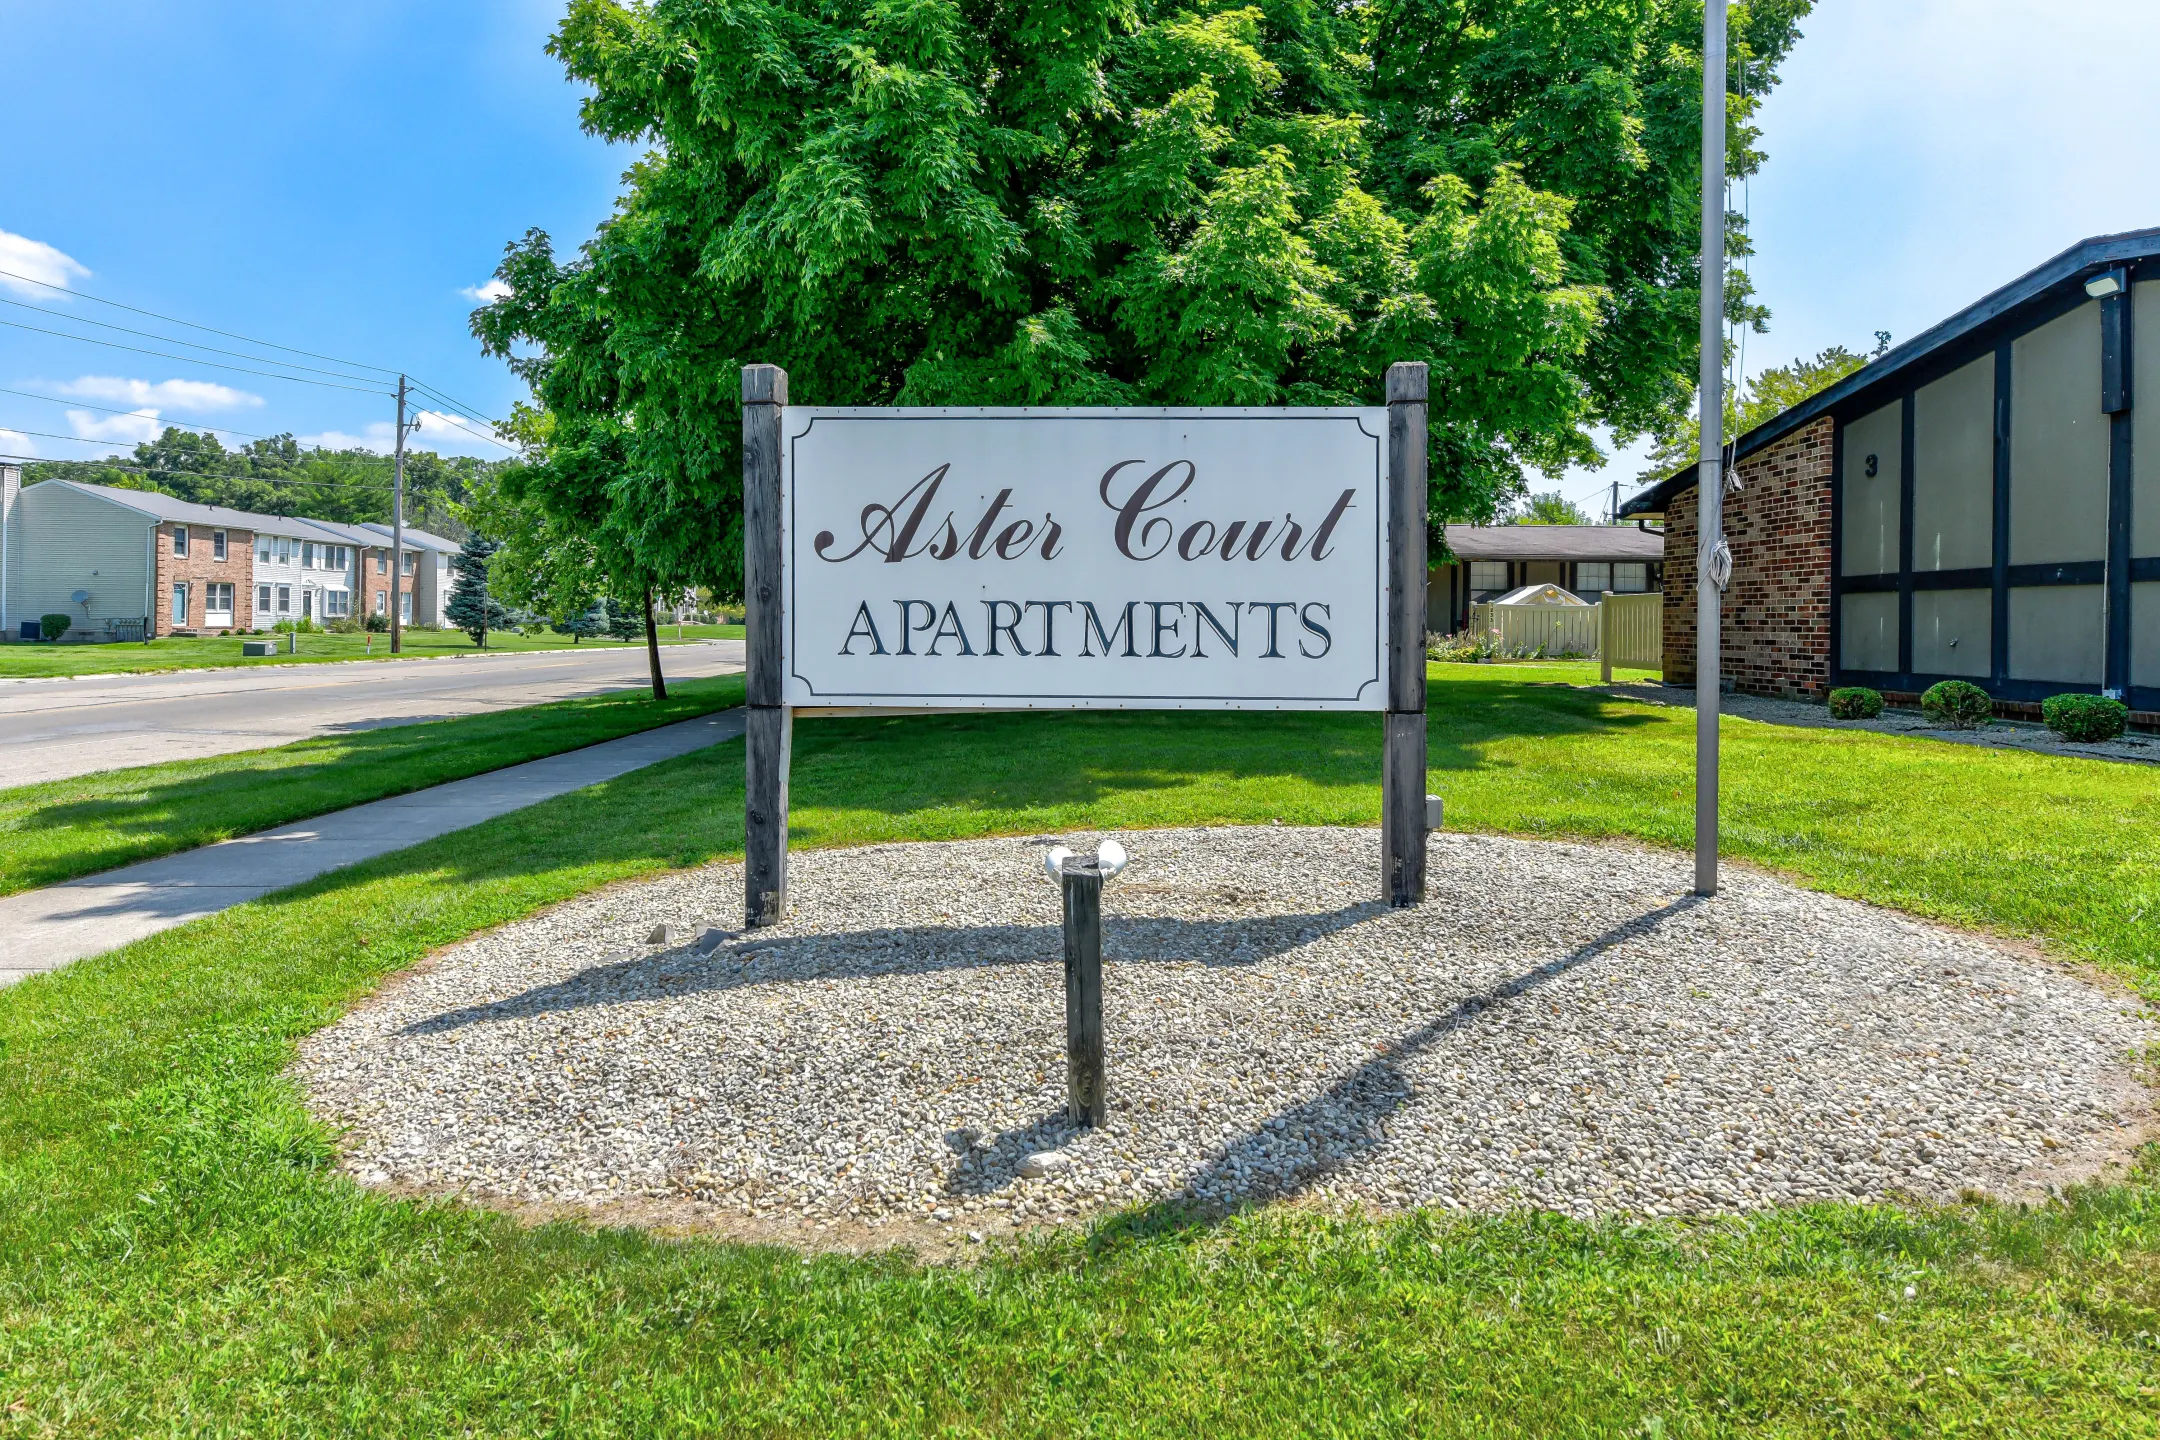 Aster Court Apartments Apartments Springfield OH 45503